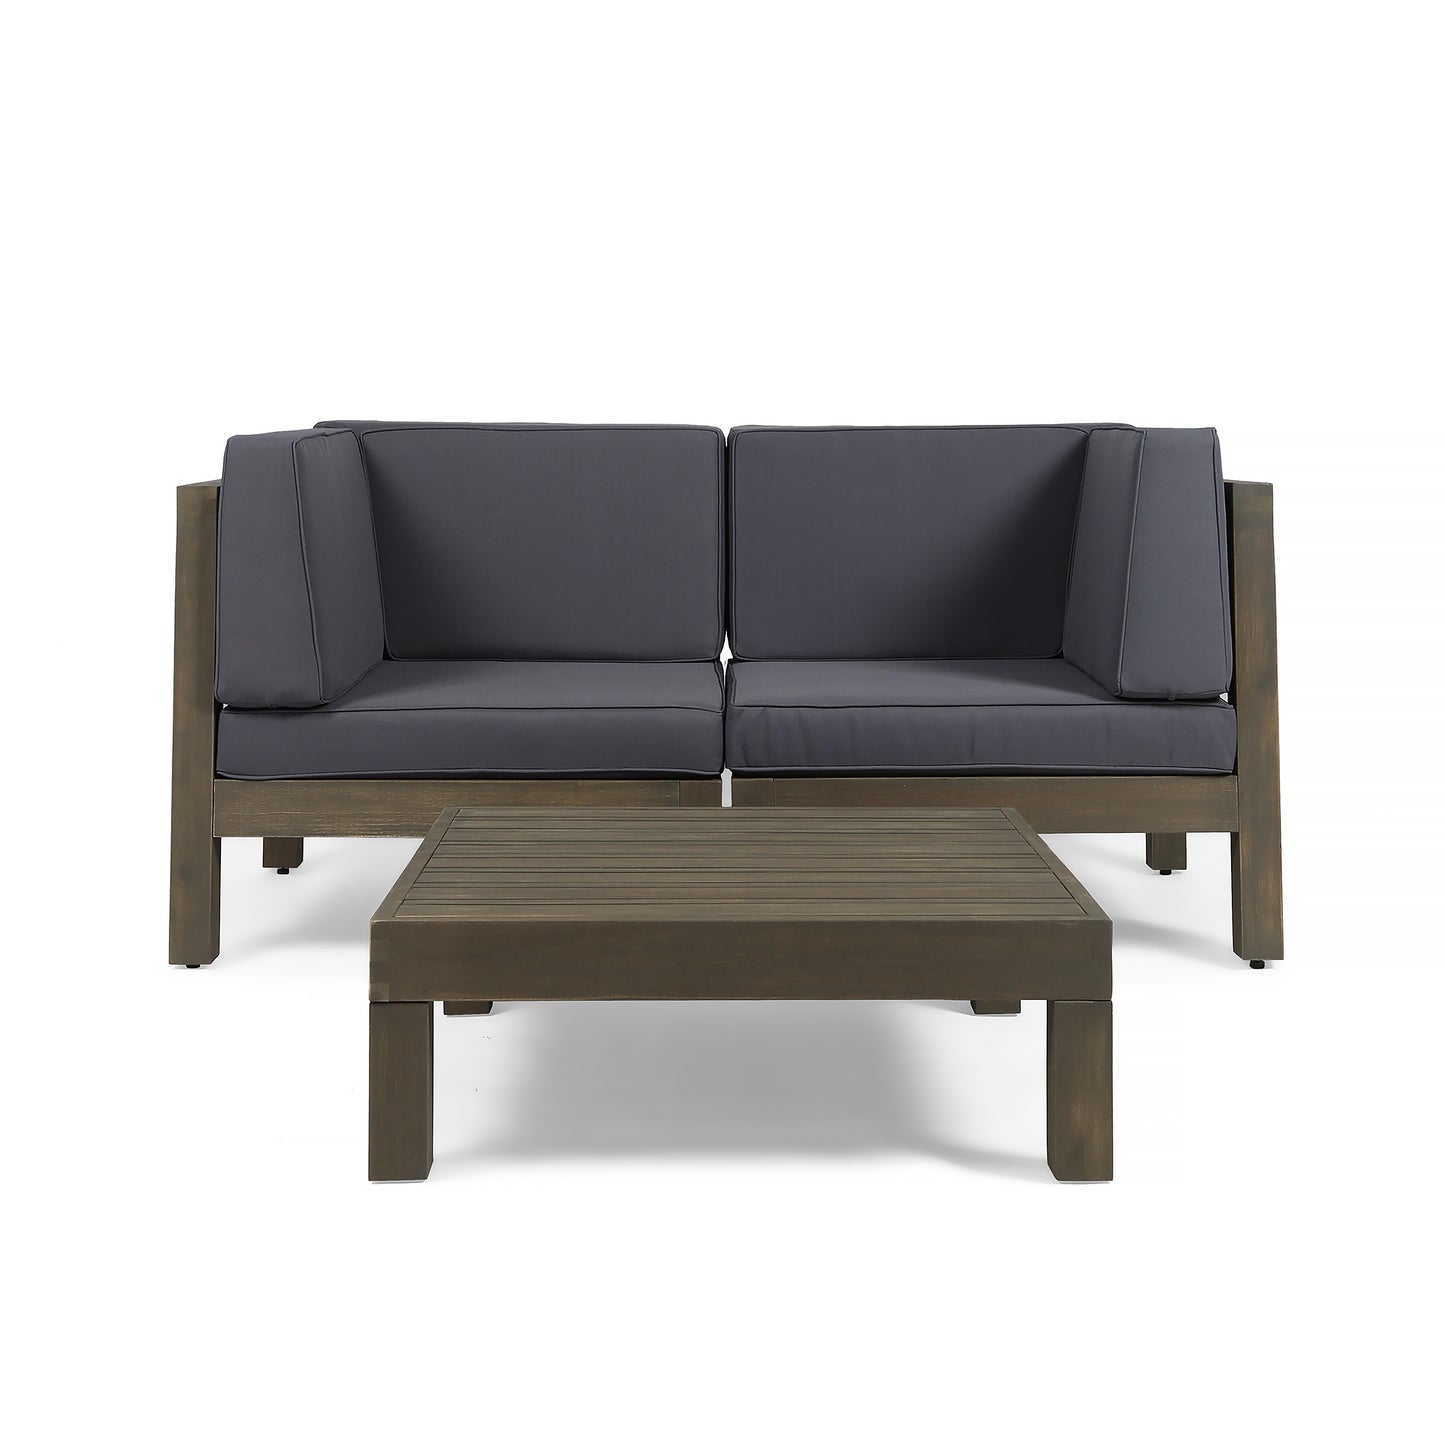 Keith Outdoor Sectional Loveseat Set with Coffee Table  2-Seater  Acacia Wood  Water-Resistant Cushions